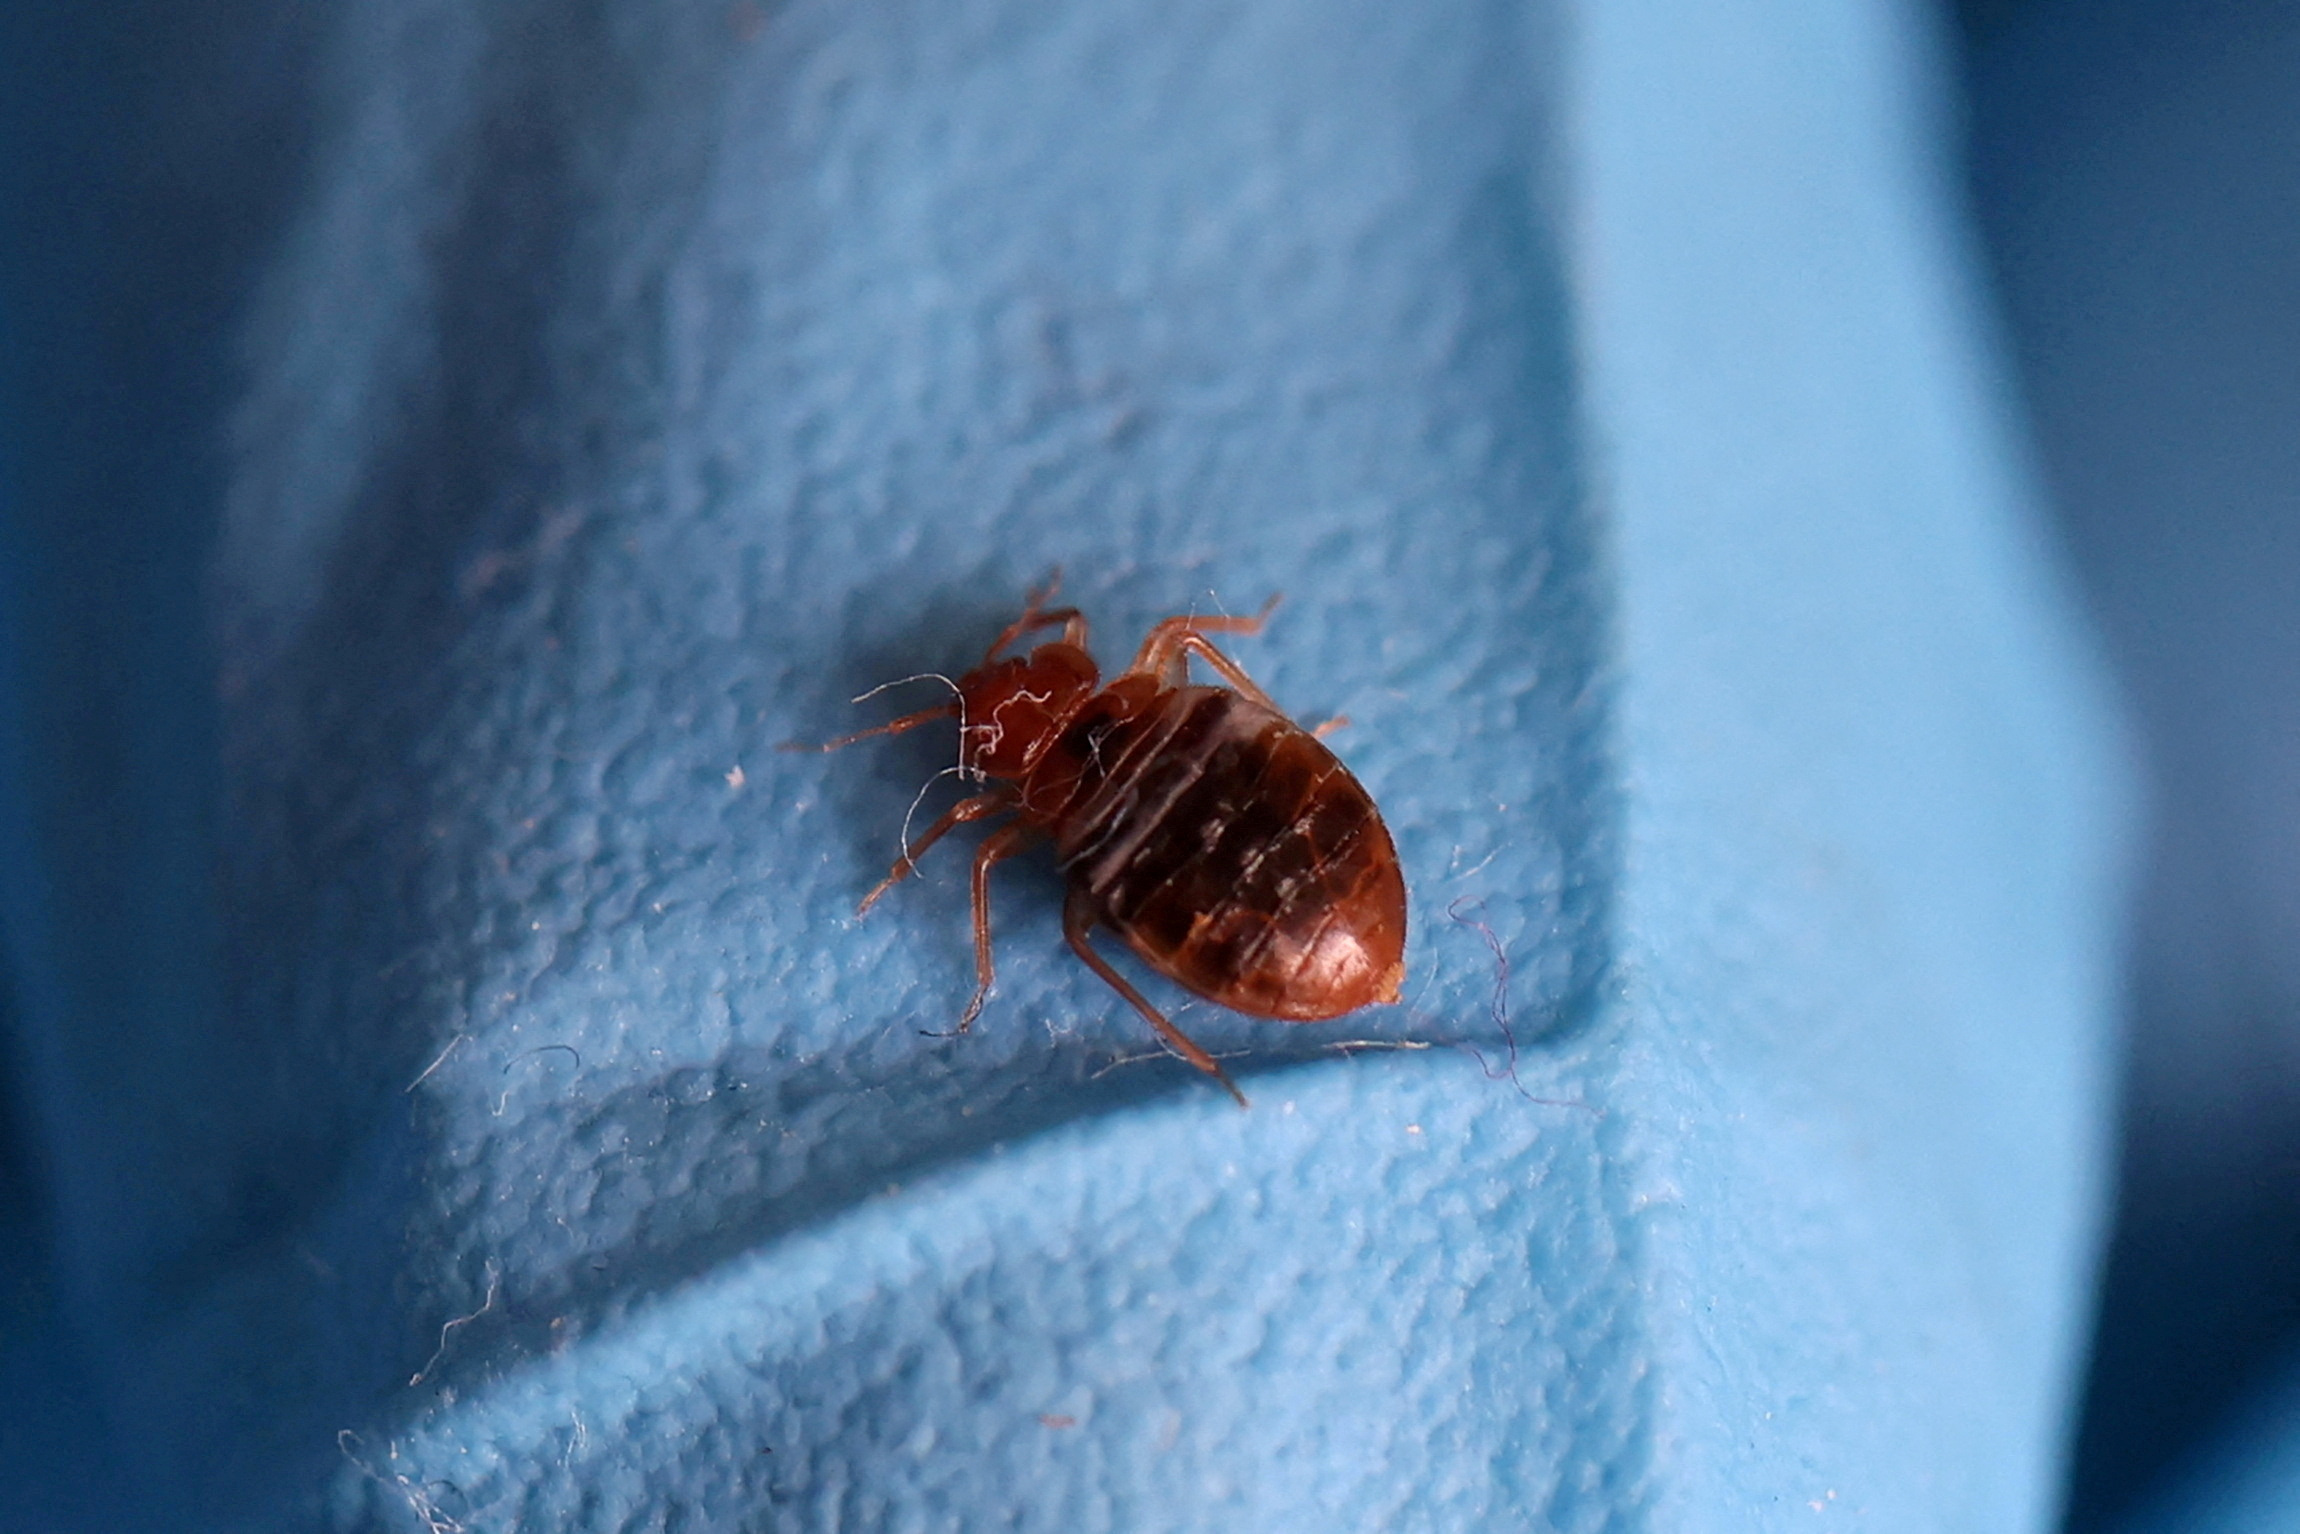 Bed Bugs and Travel: Our Editor's Recent Experience